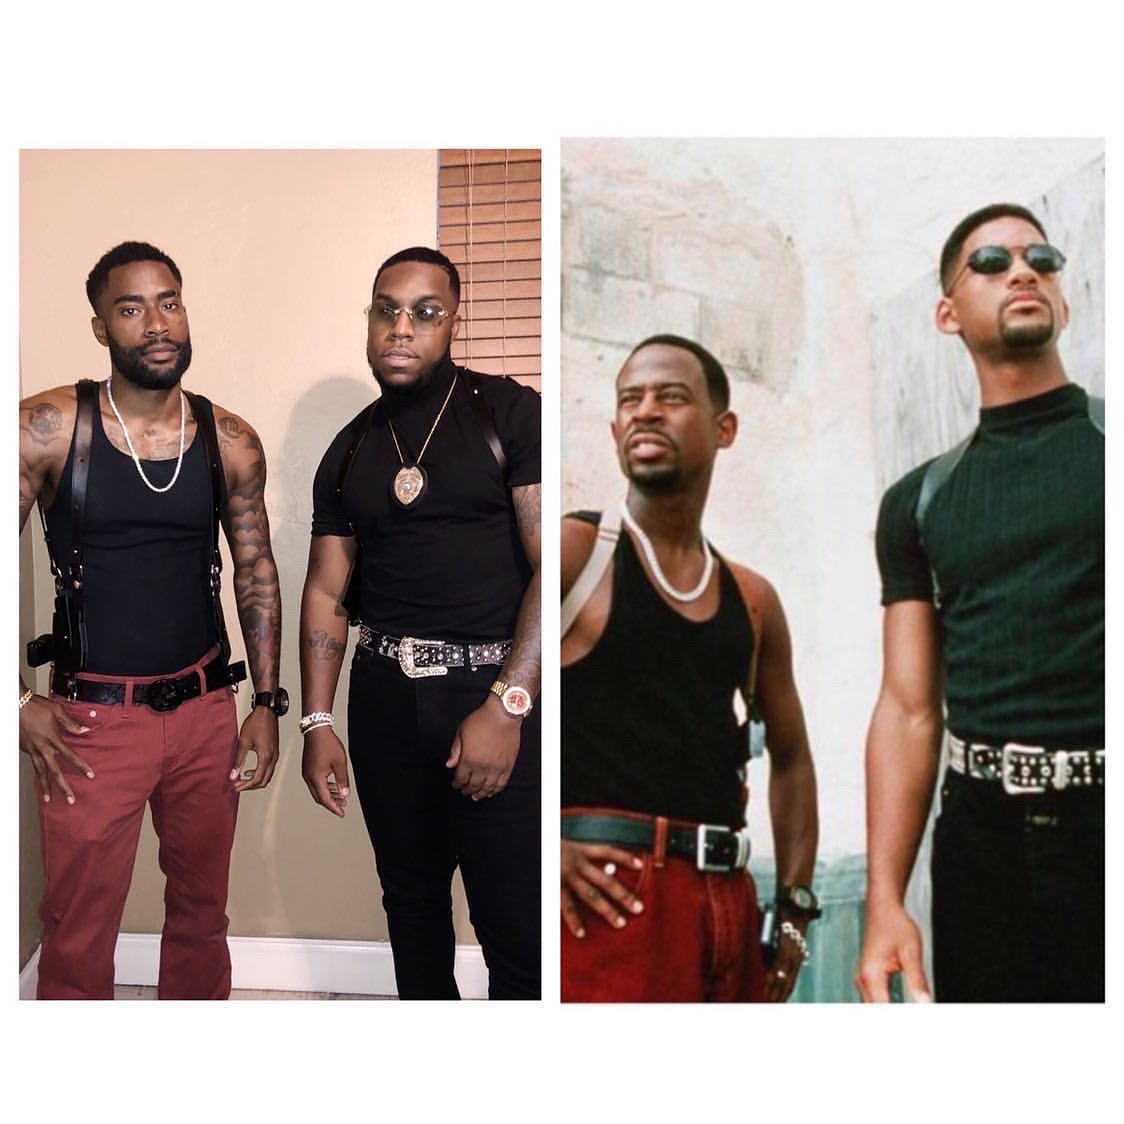 THREAD: Miami-Dade cops Rod Flowers and Keith Edwards dressed up as the "Bad Boys" characters for Halloween last year. “We ride together. We die together. Bad Boys 4 Life.”Feds say they may now go to prison together.  https://www.miamiherald.com/news/local/crime/article246825847.html